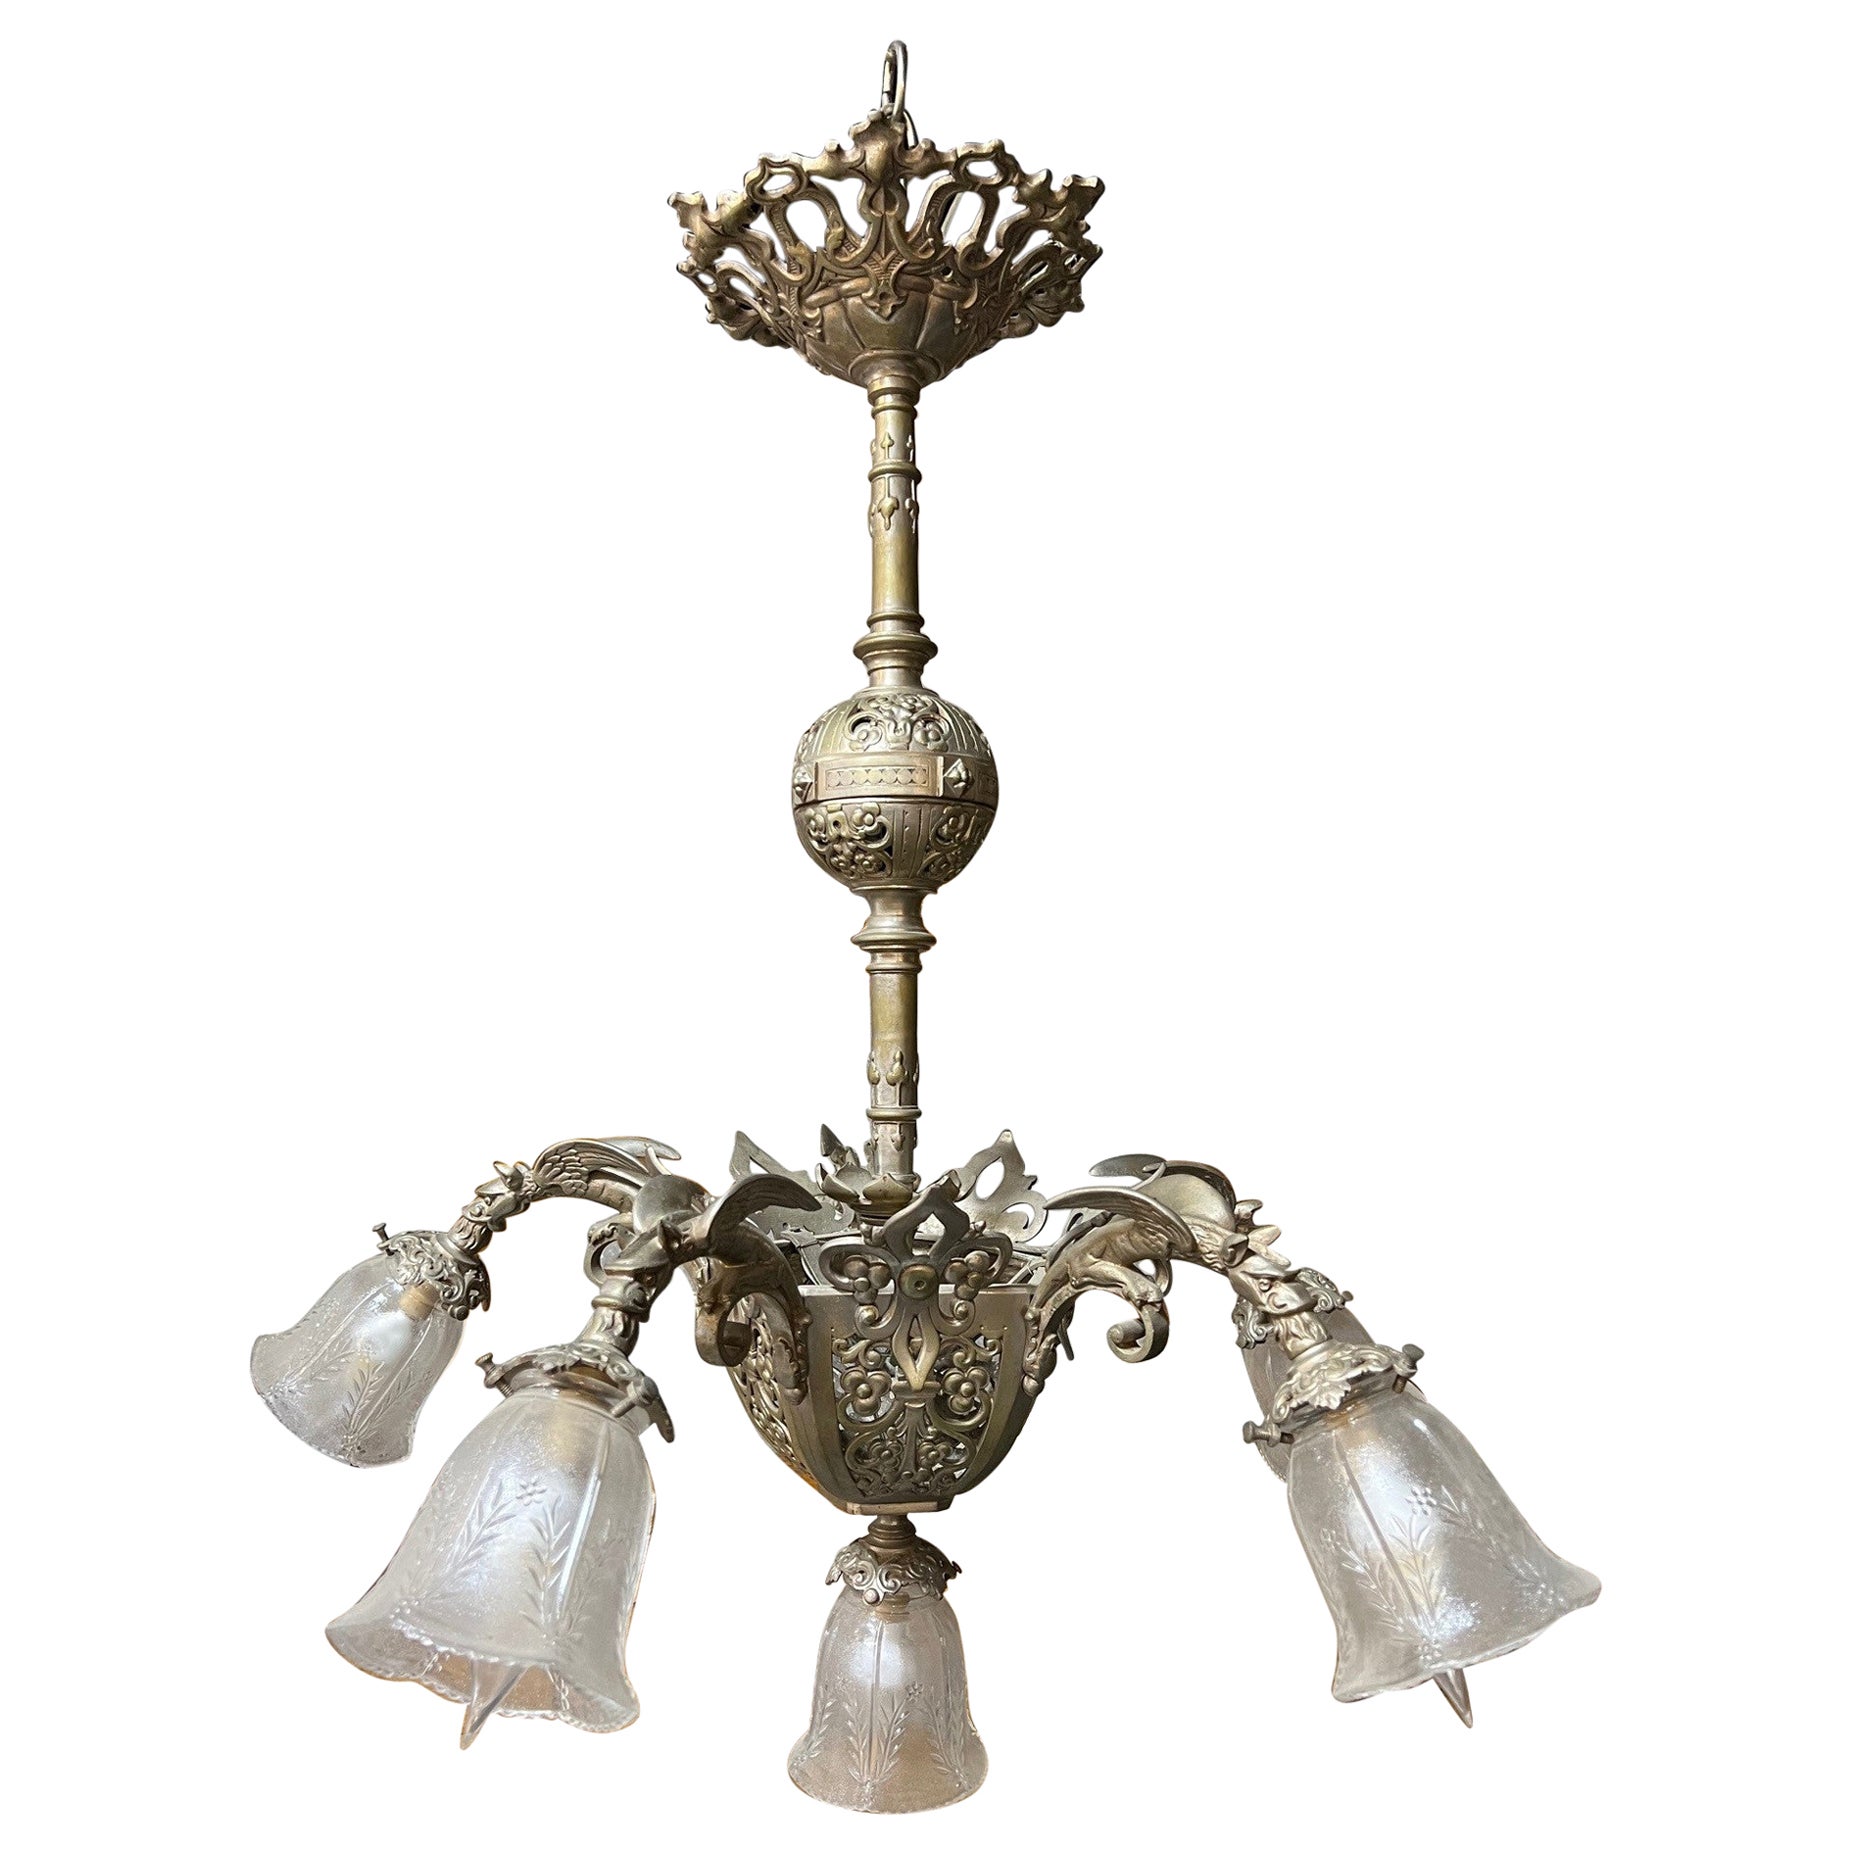 Antique Brushed Nickel Finish Brass 6 Light Chandelier with 5 Griffin Arms  For Sale